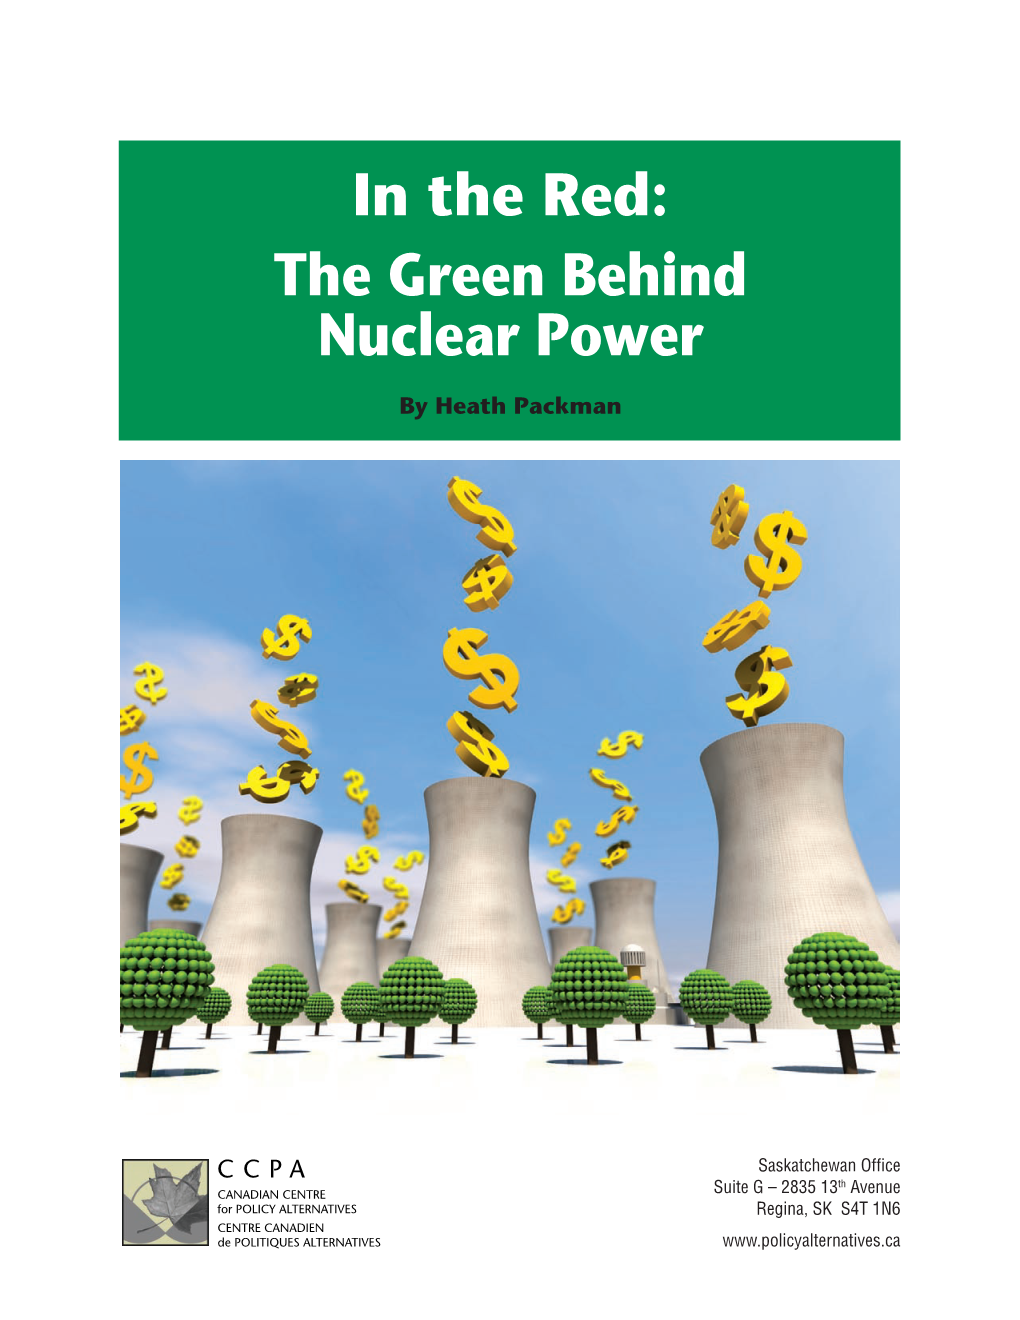 In the Red: the Green Behind Nuclear Power